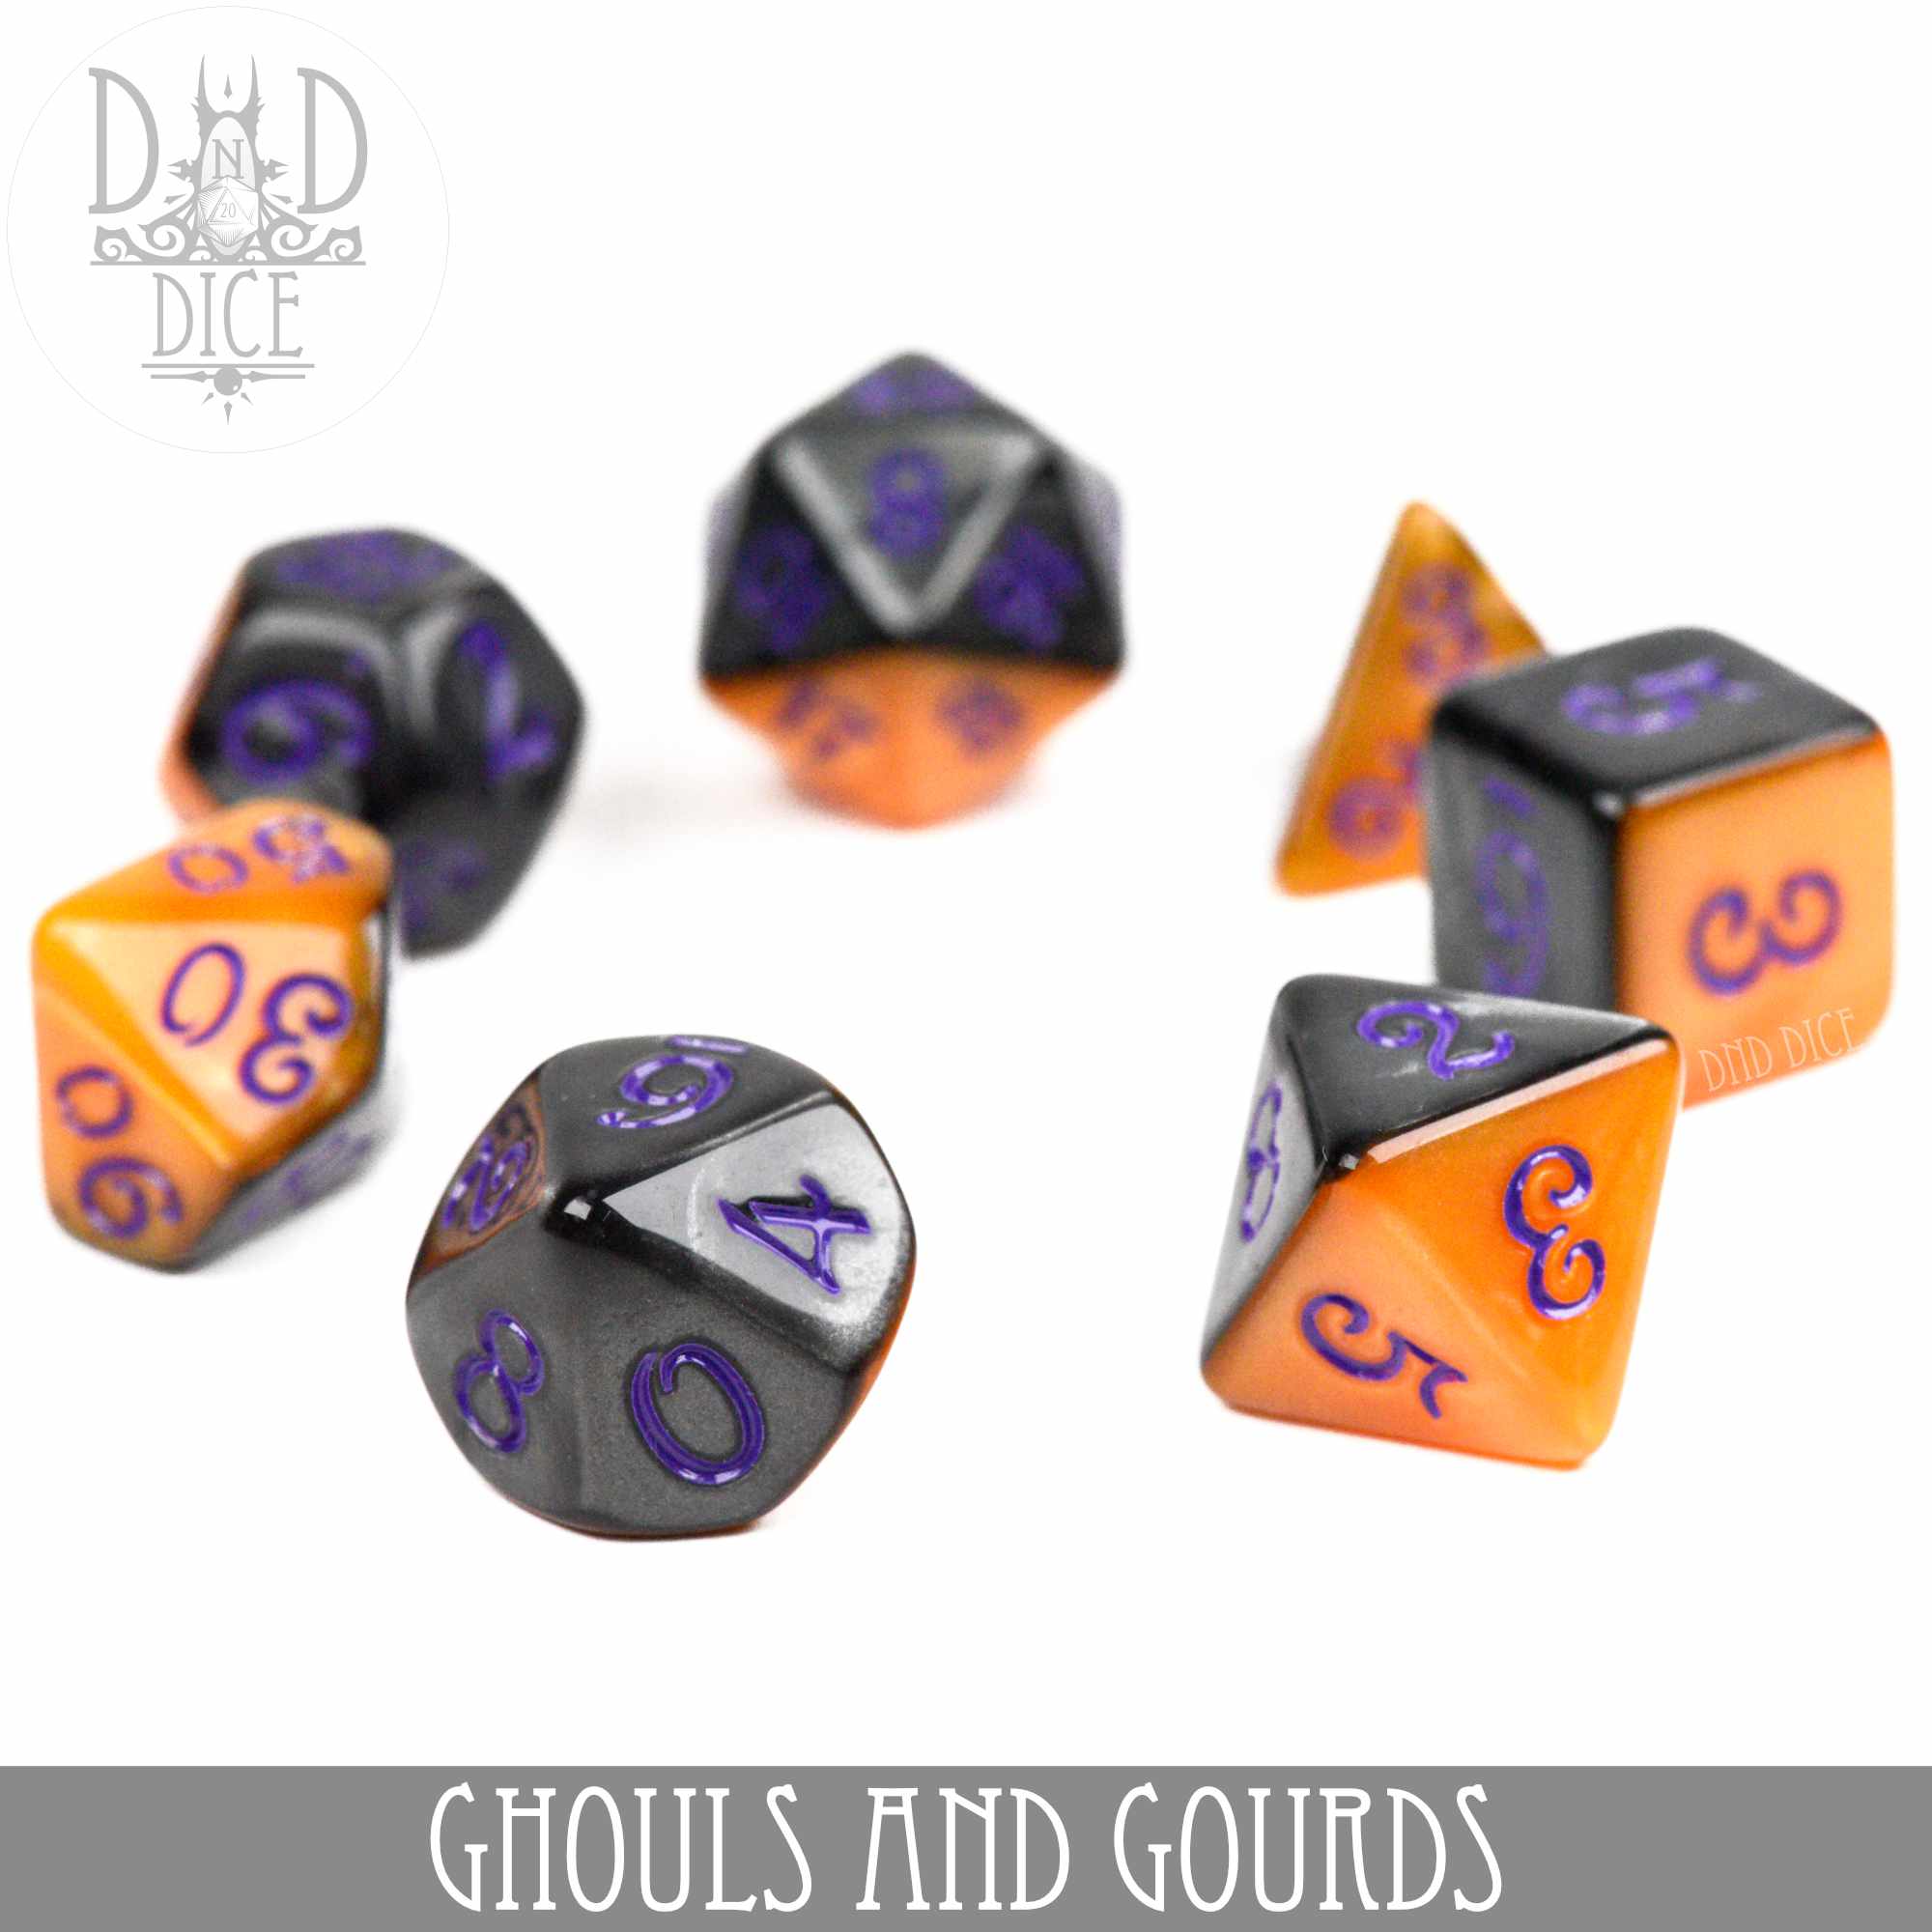 Ghouls and Gourds Dice Set